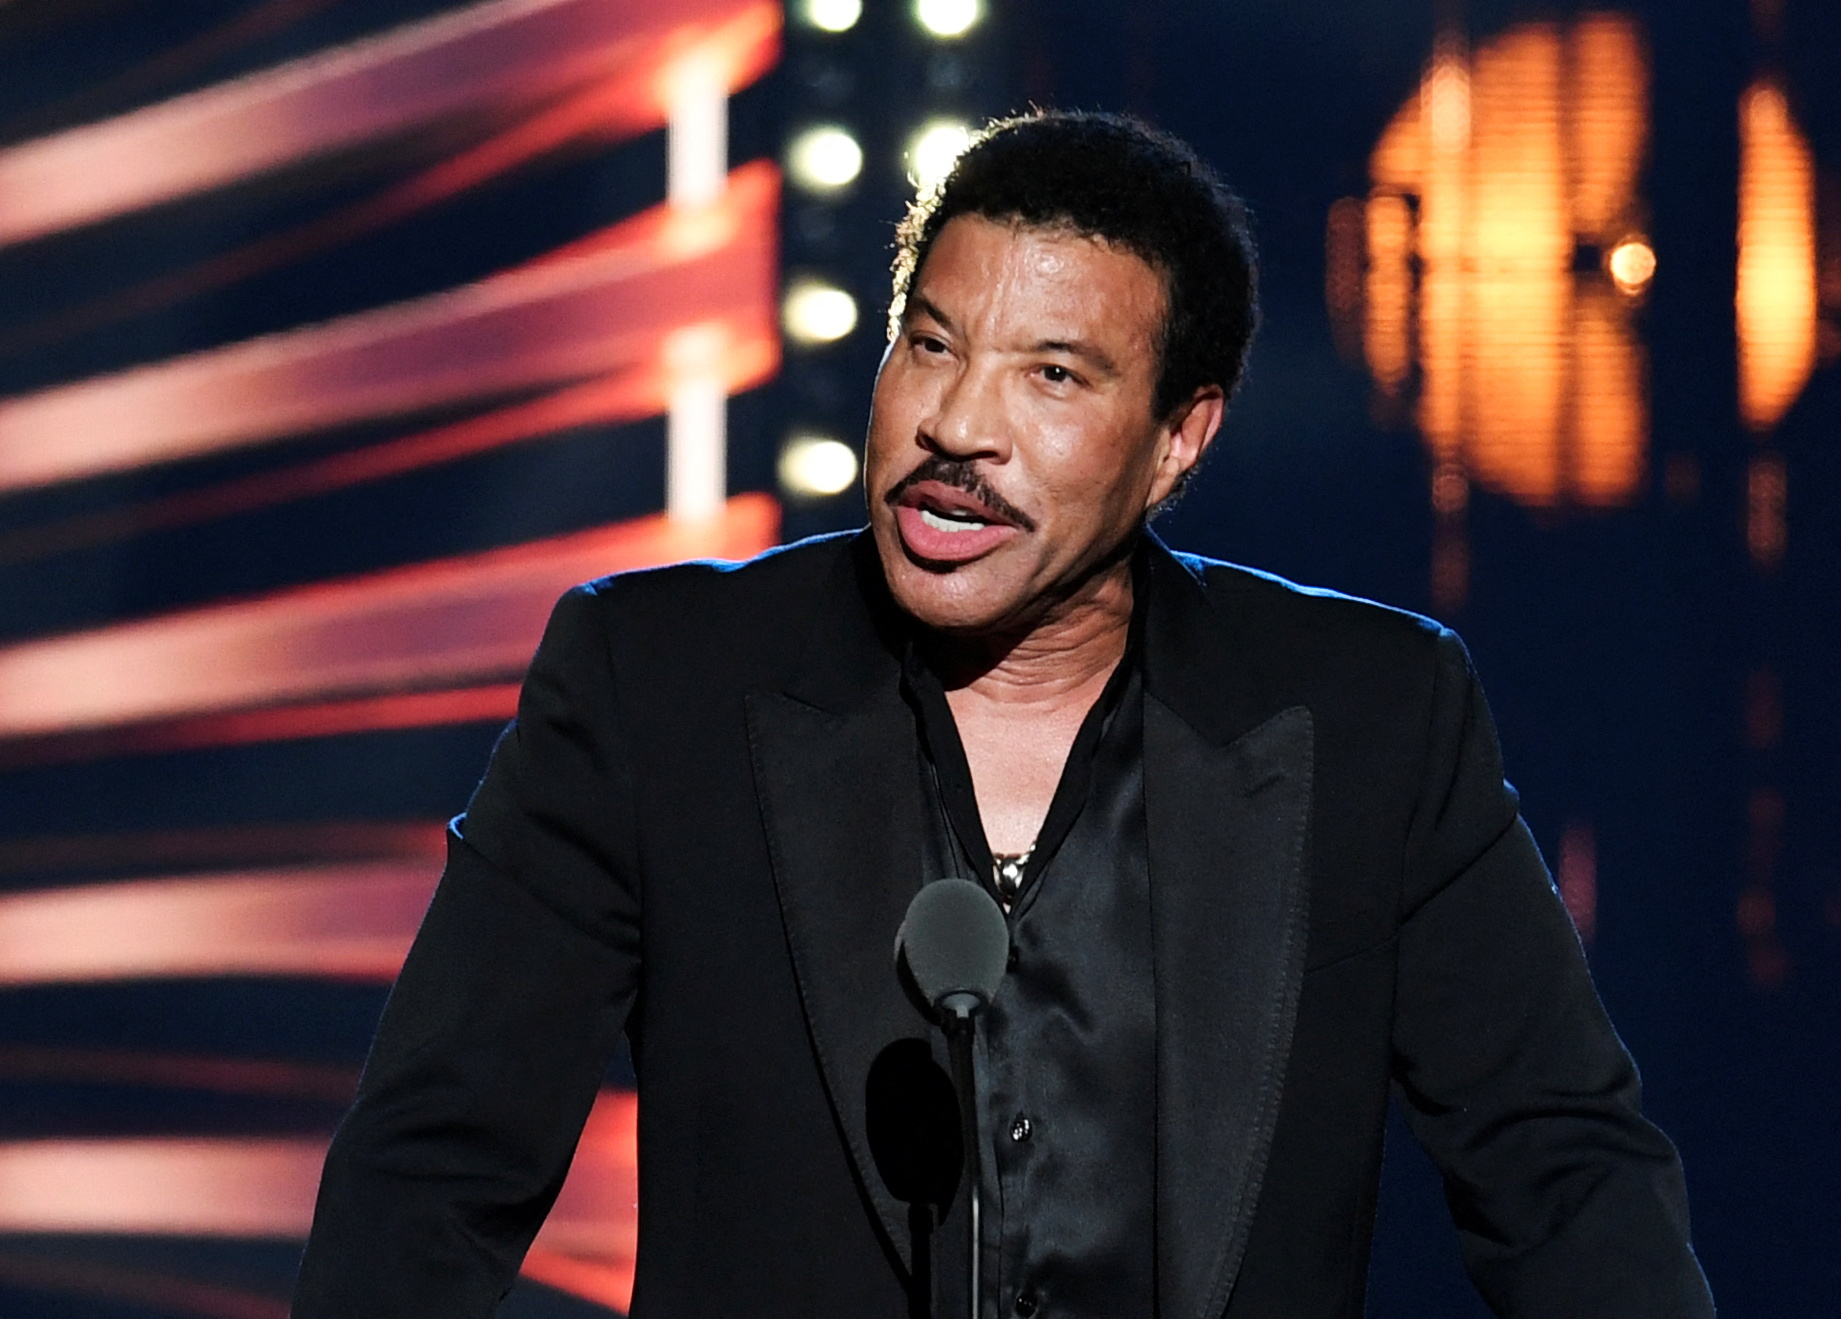 Lionel Richie introduces Clarence Avant during the Rock and Roll Hall of Fame induction ceremony in Cleveland, Ohio, U.S. October 30, 2021. REUTERS/Gaelen Morse